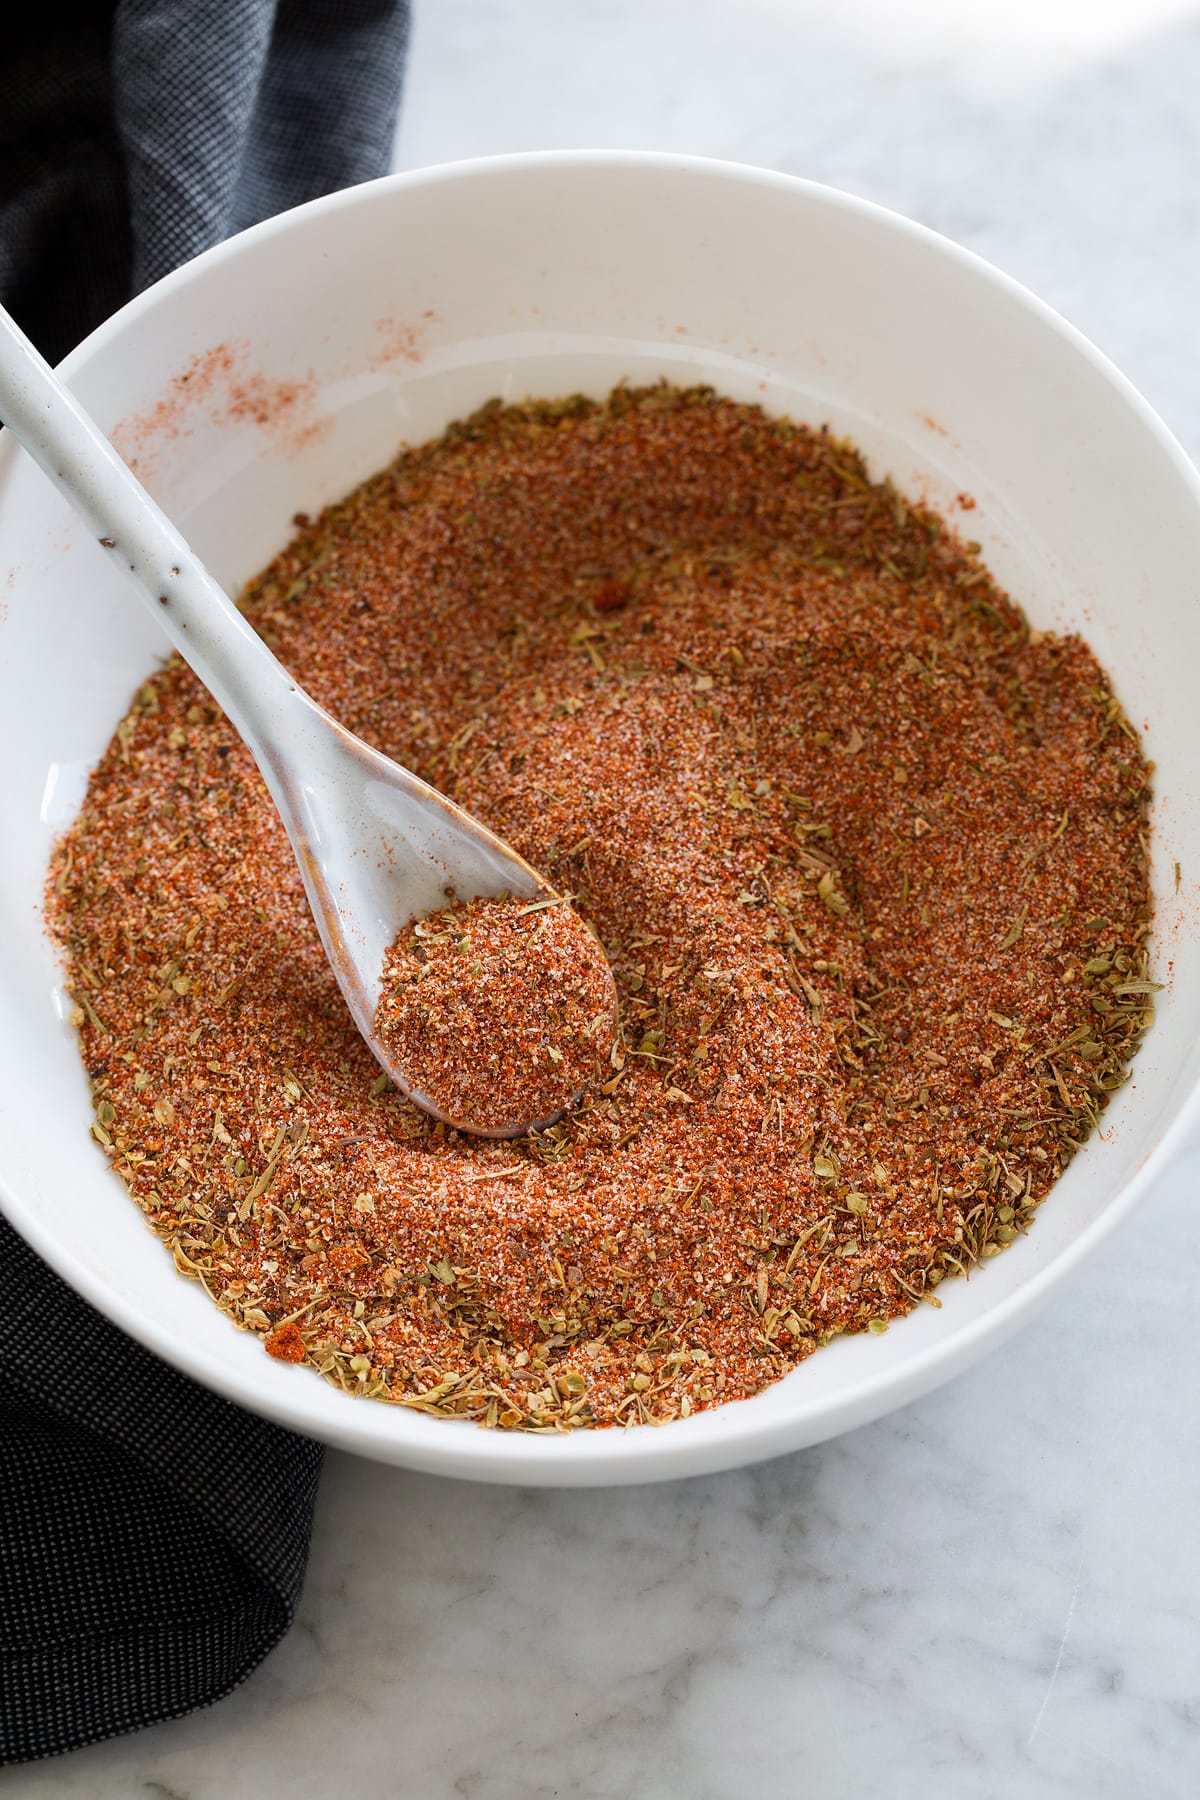 Photo: Mixed cajun seasoning in a small bowl with a spoon.